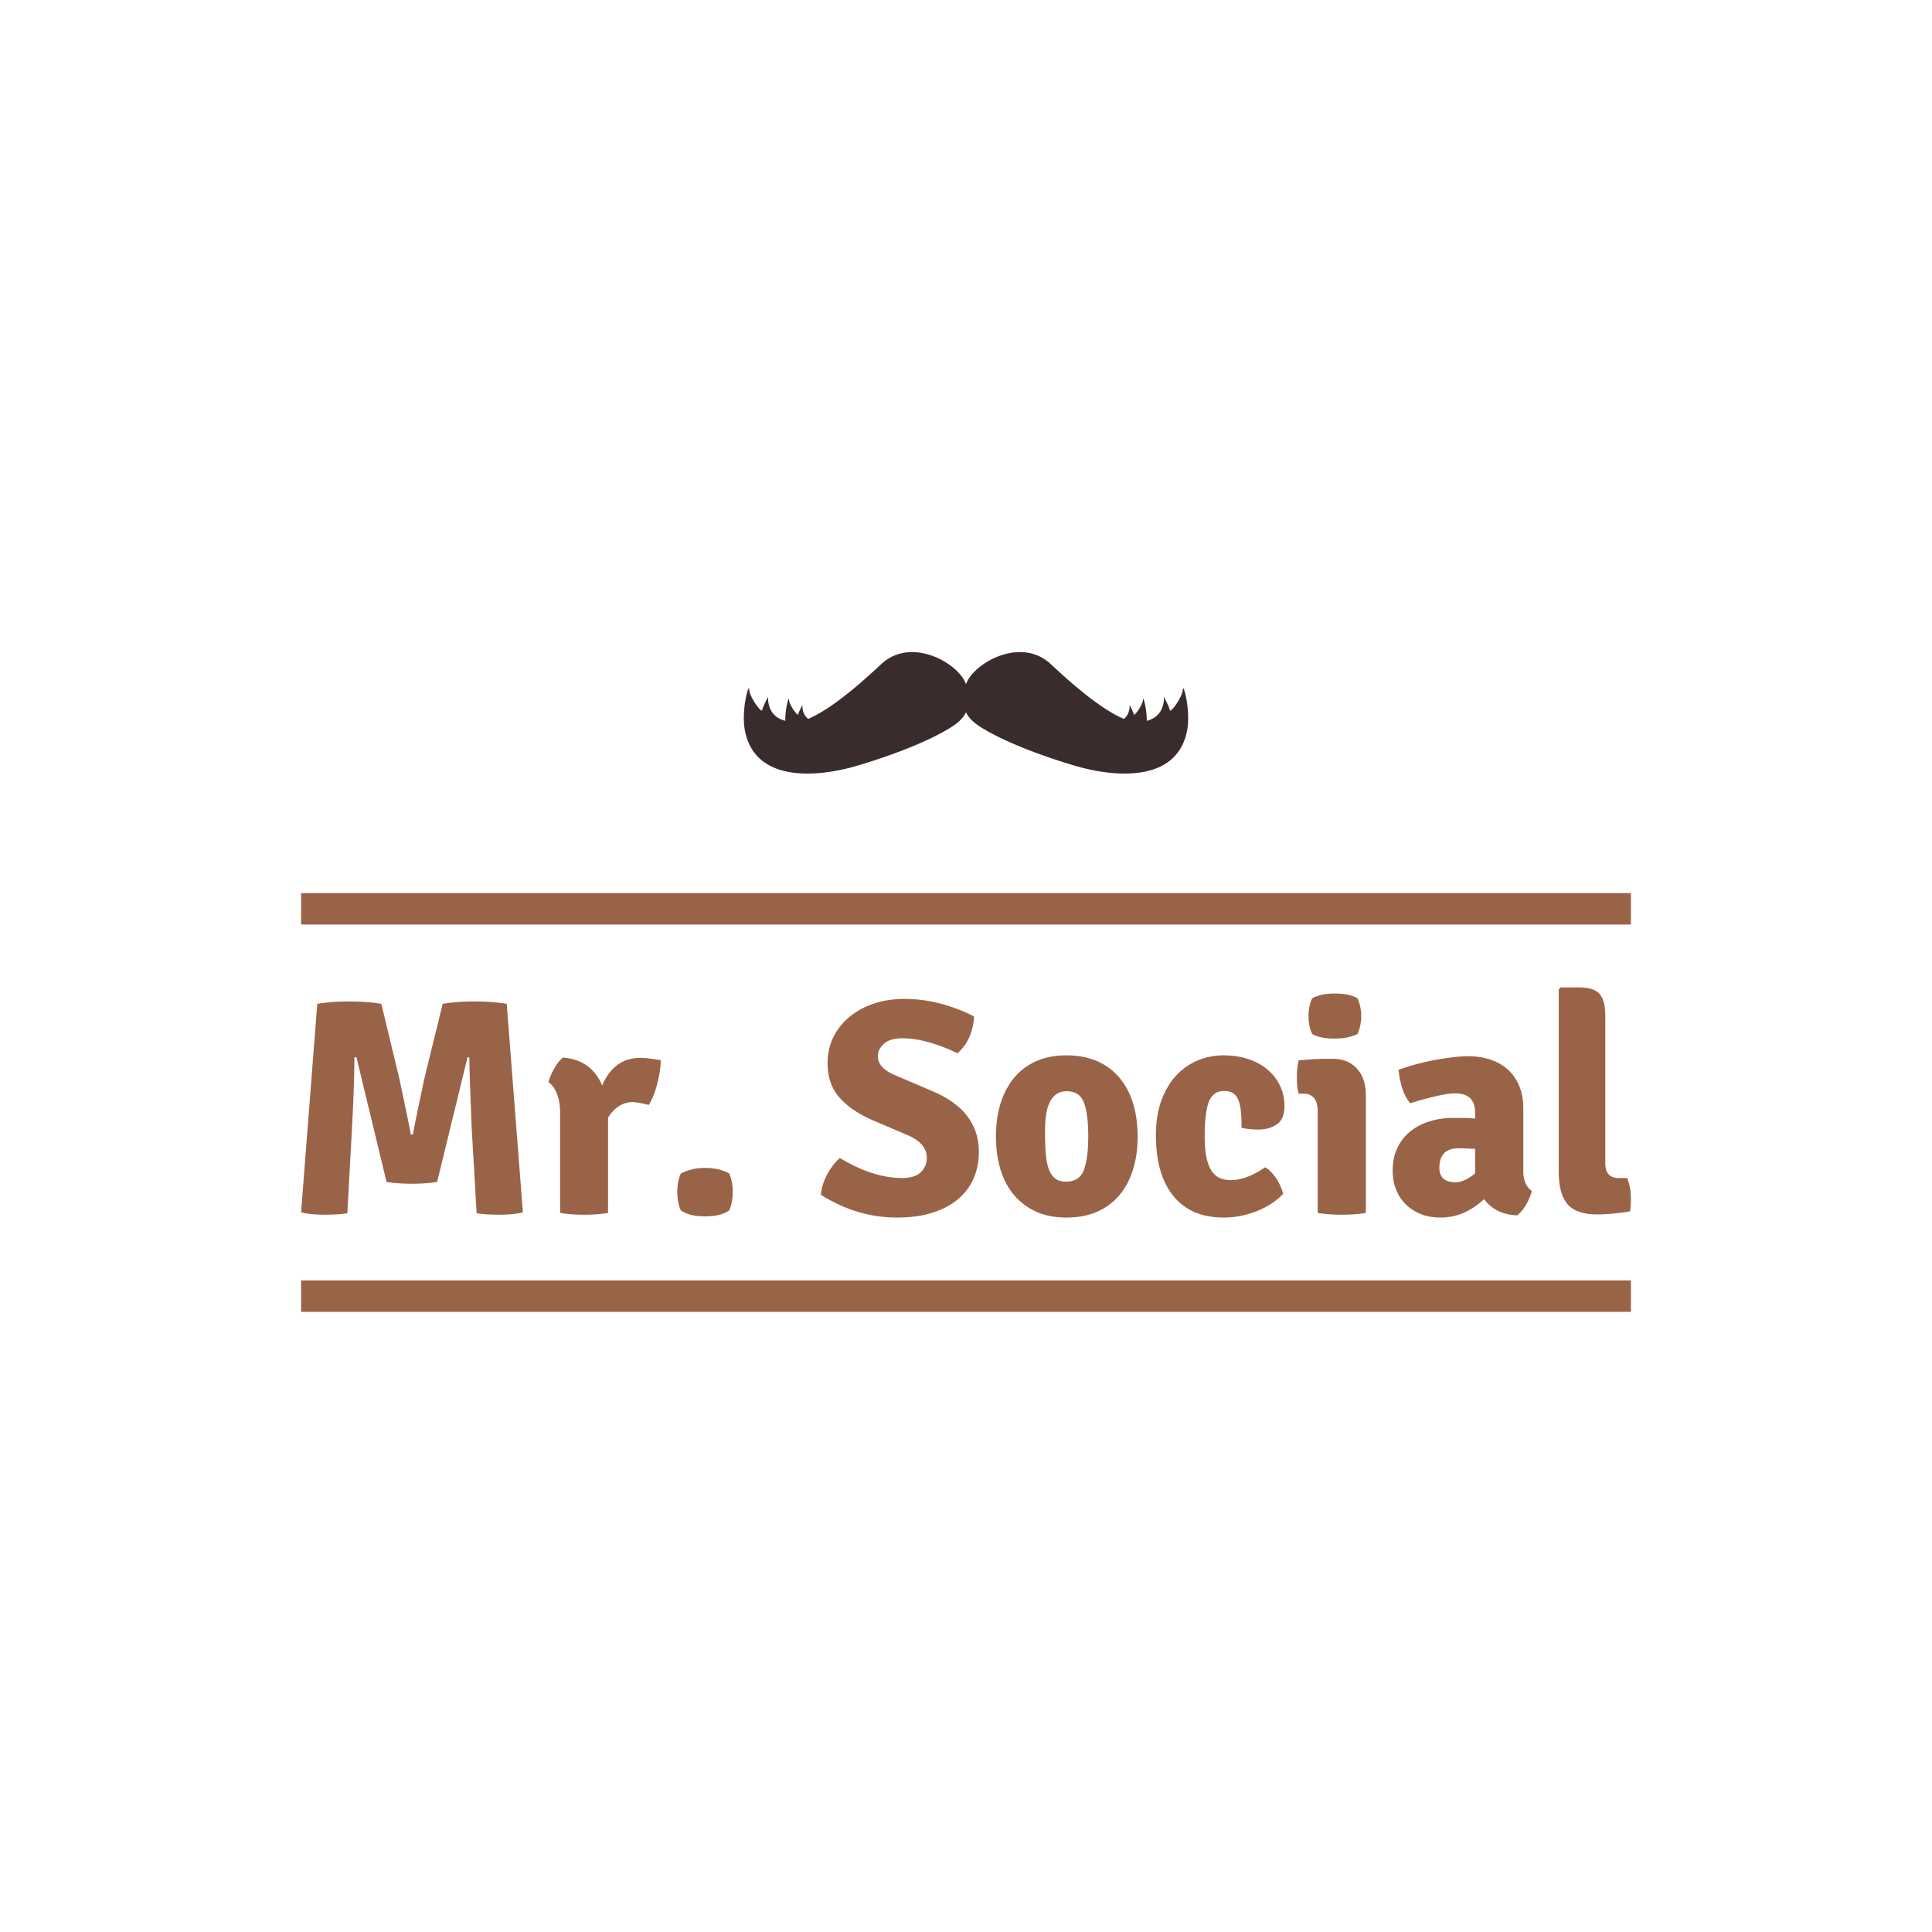 Mr. Social is a social media assistant that finds interesting content and publishes it on a schedule